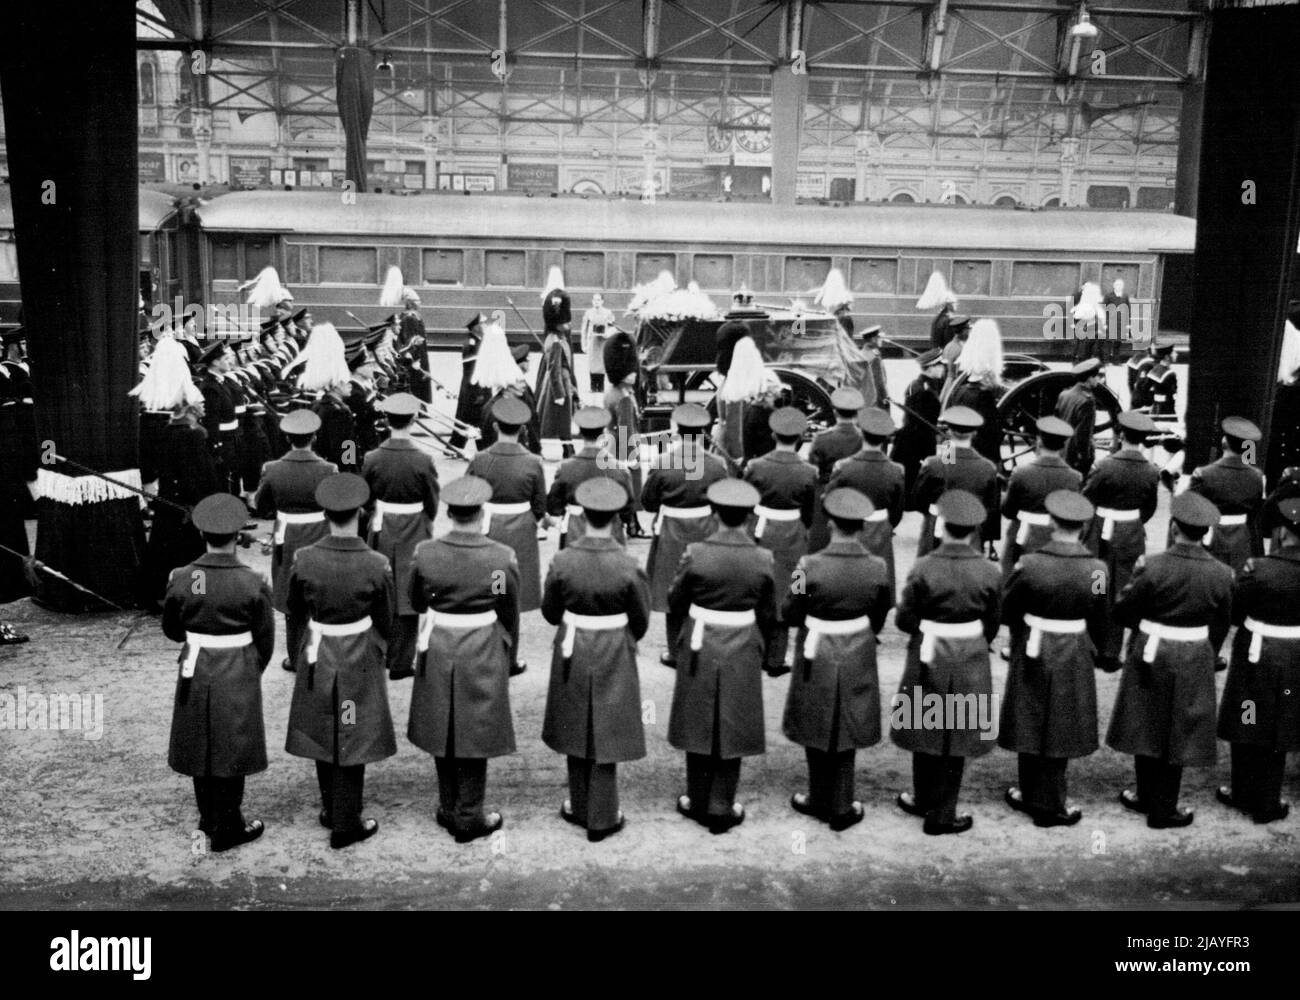 The Funeral Of King George VI Departure From Paddington - The gun carriage bearing the Royal Coffin at Paddington Station. From there the Royal Coffin was taken by train to Windsor. Note that the pillars of the station are draped in black. February 15, 1952. (Photo by Paul Popper, Paul Popper Ltd.). Stock Photo